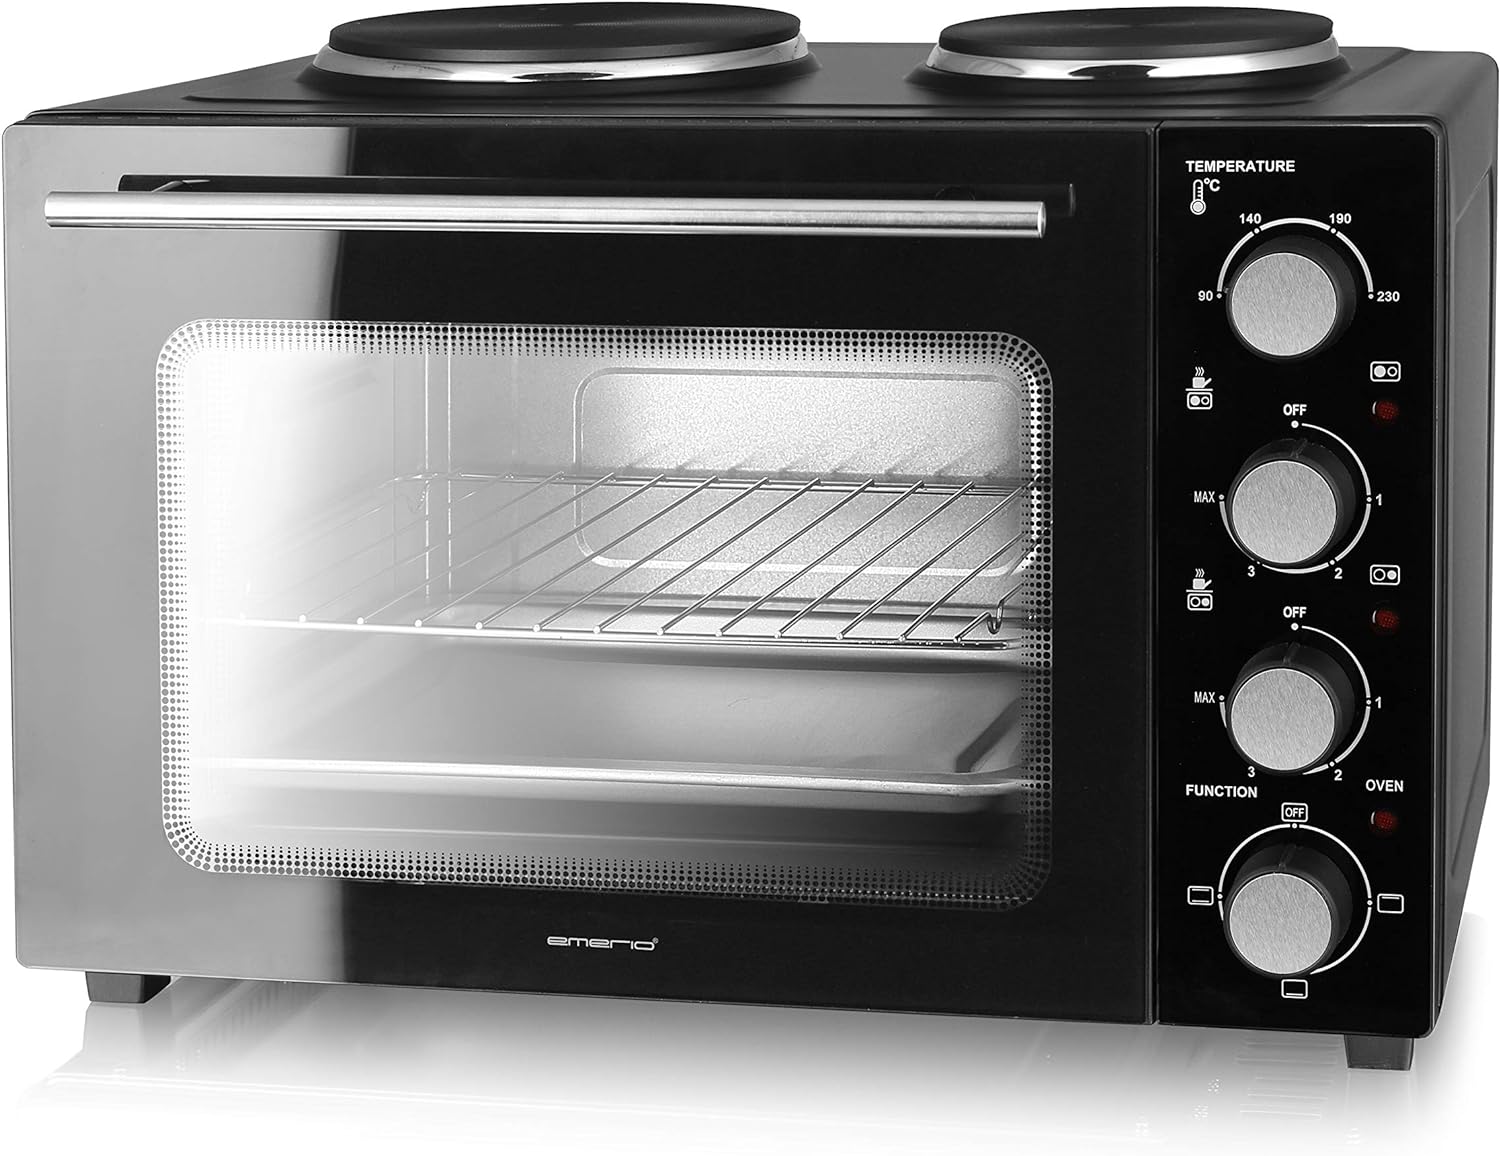 Emerio Multi Oven with 2 Hobs, 3200 Watt, Pizza Oven, Camping Kitchen, Cooking and Baking Simultaneously, Top/Bottom Heat, Thermostat, 90°-230°C, Interior Lighting, BPA-Free, MO-125236, Black